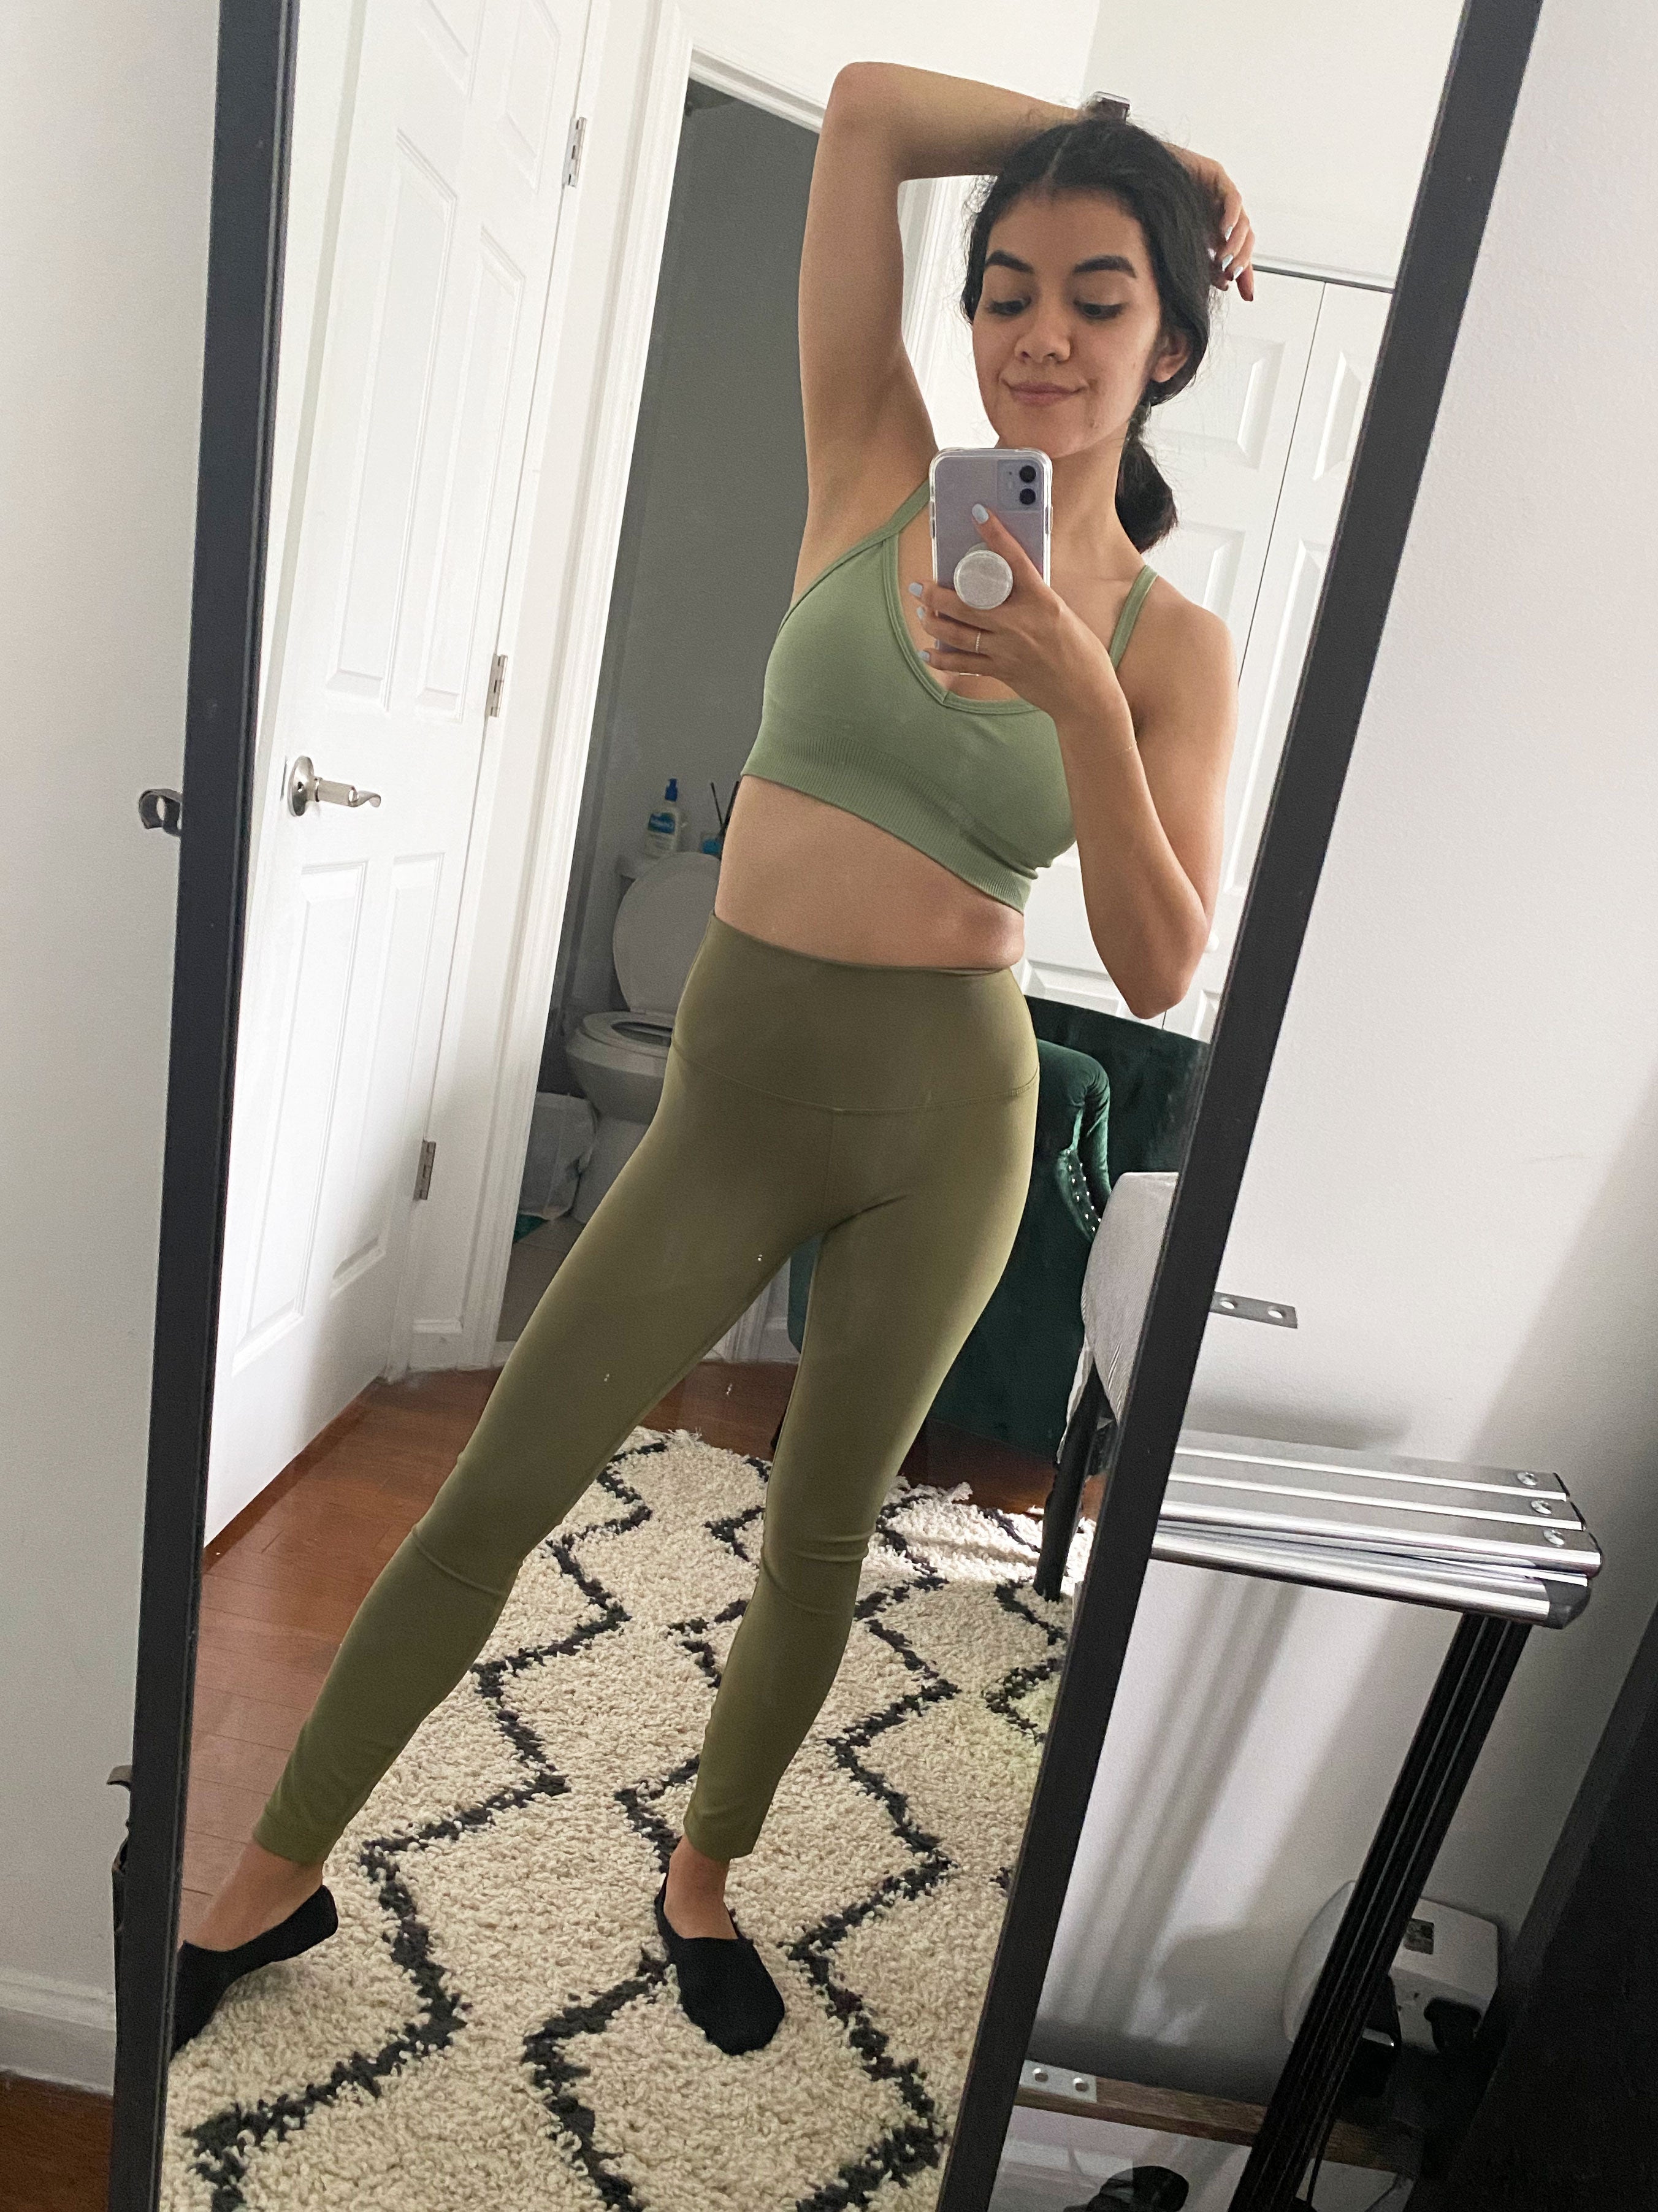 lululemon Review: Entwined Hi-Rise Wunder Under Pant in Nulux - Schimiggy  Reviews